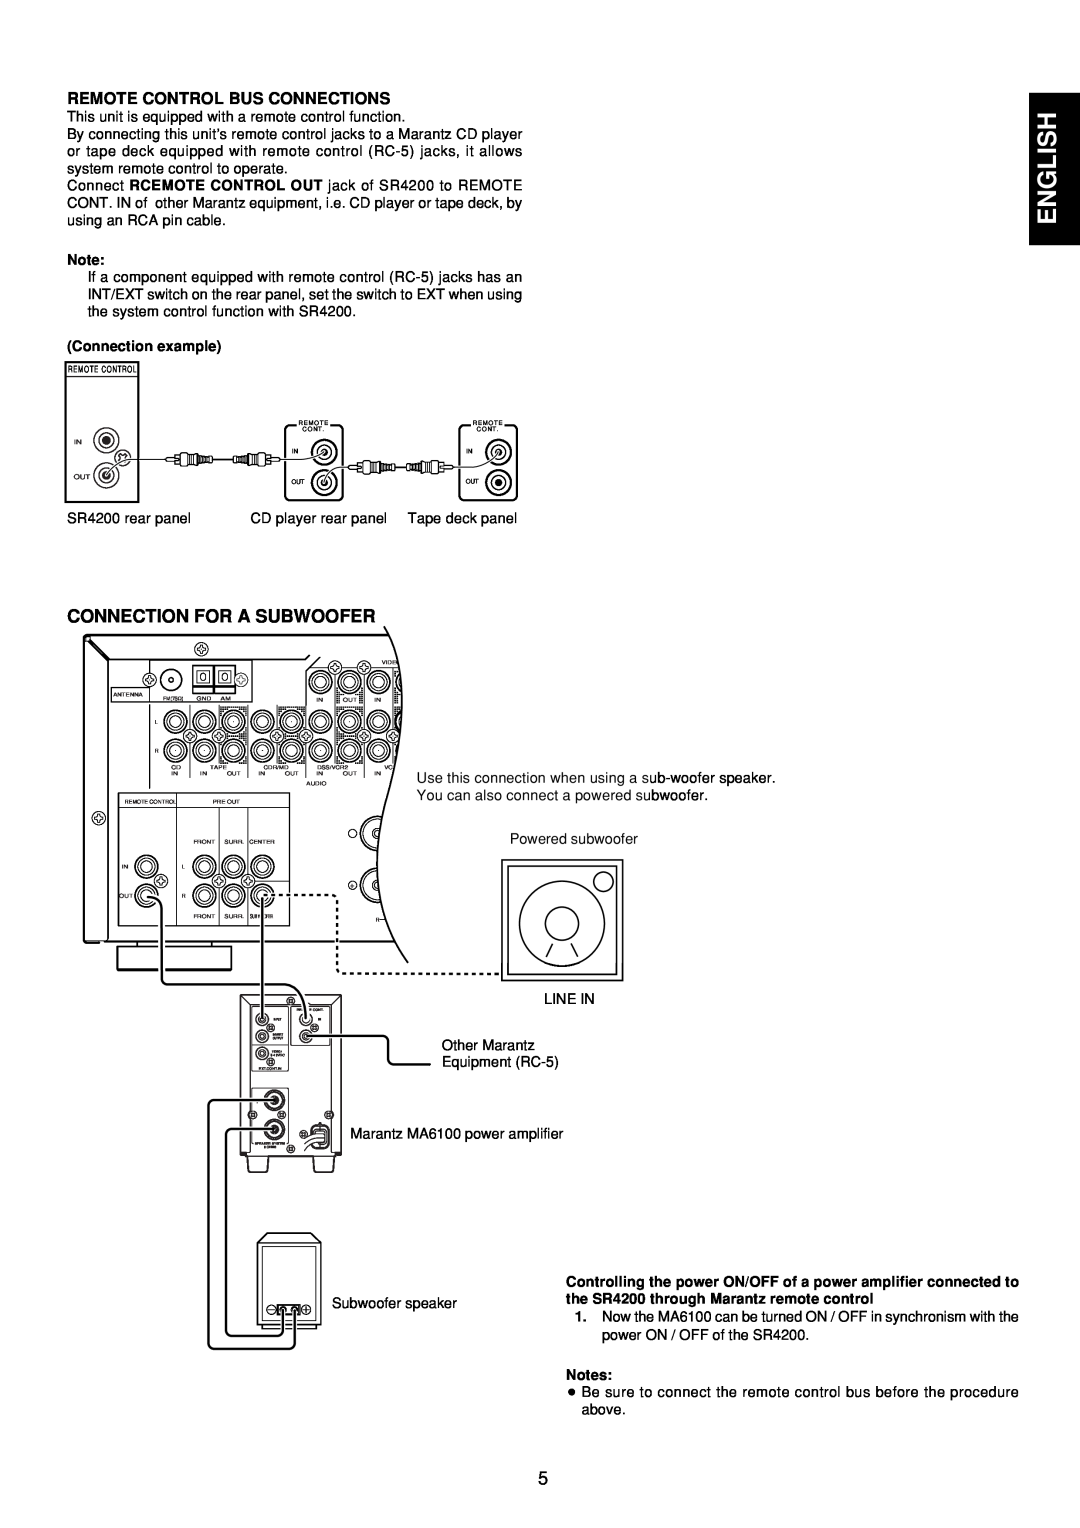 Marantz SR4200 manual English, Remote Control Bus Connections, Connection example, Subwoofer speaker 